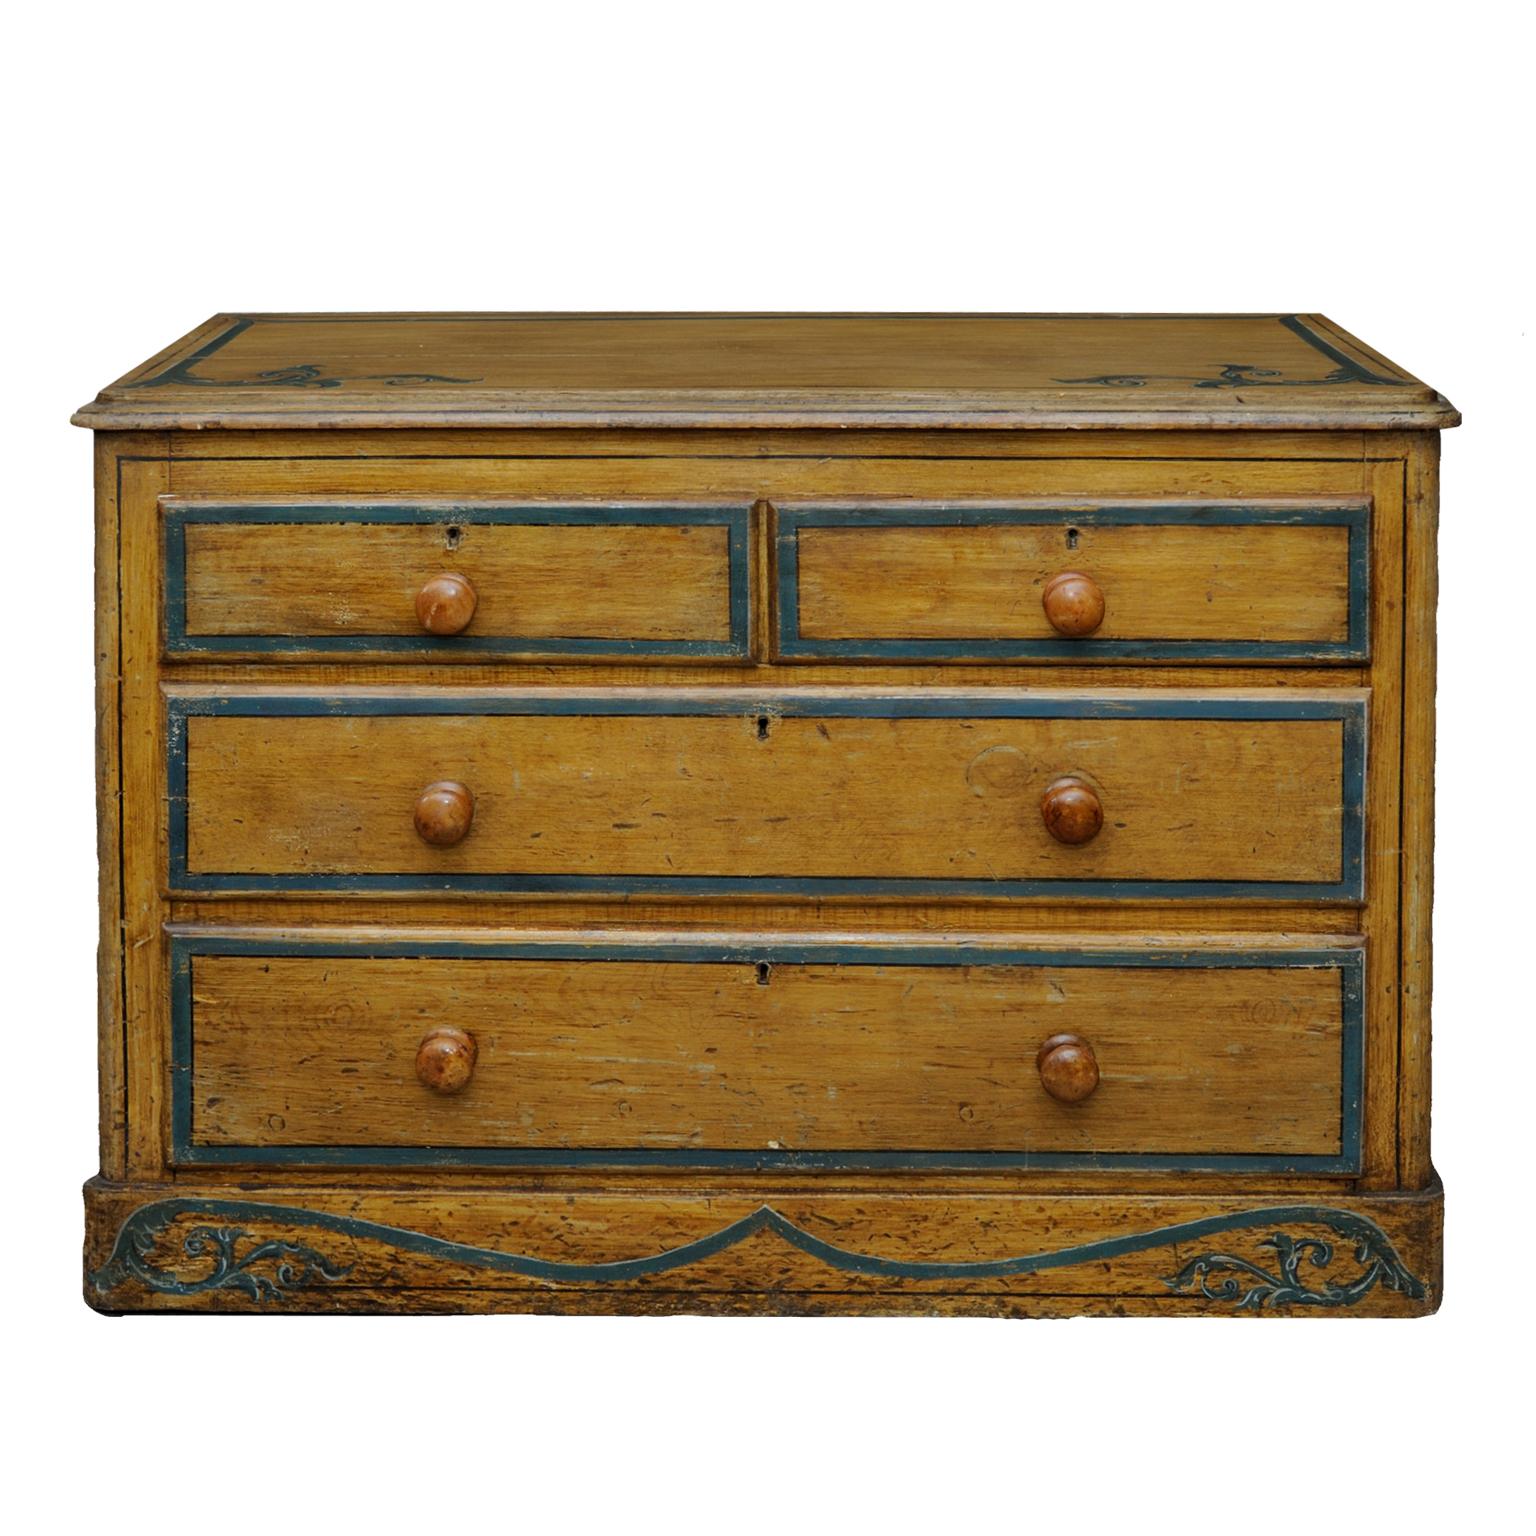 This is a wonderful mid-19th century suite of English painted furniture. Two chest of drawers, one with decorative splash back and also a separate dressing stand or table. Painted pine retaining original decorative paintwork (lightly refreshed),